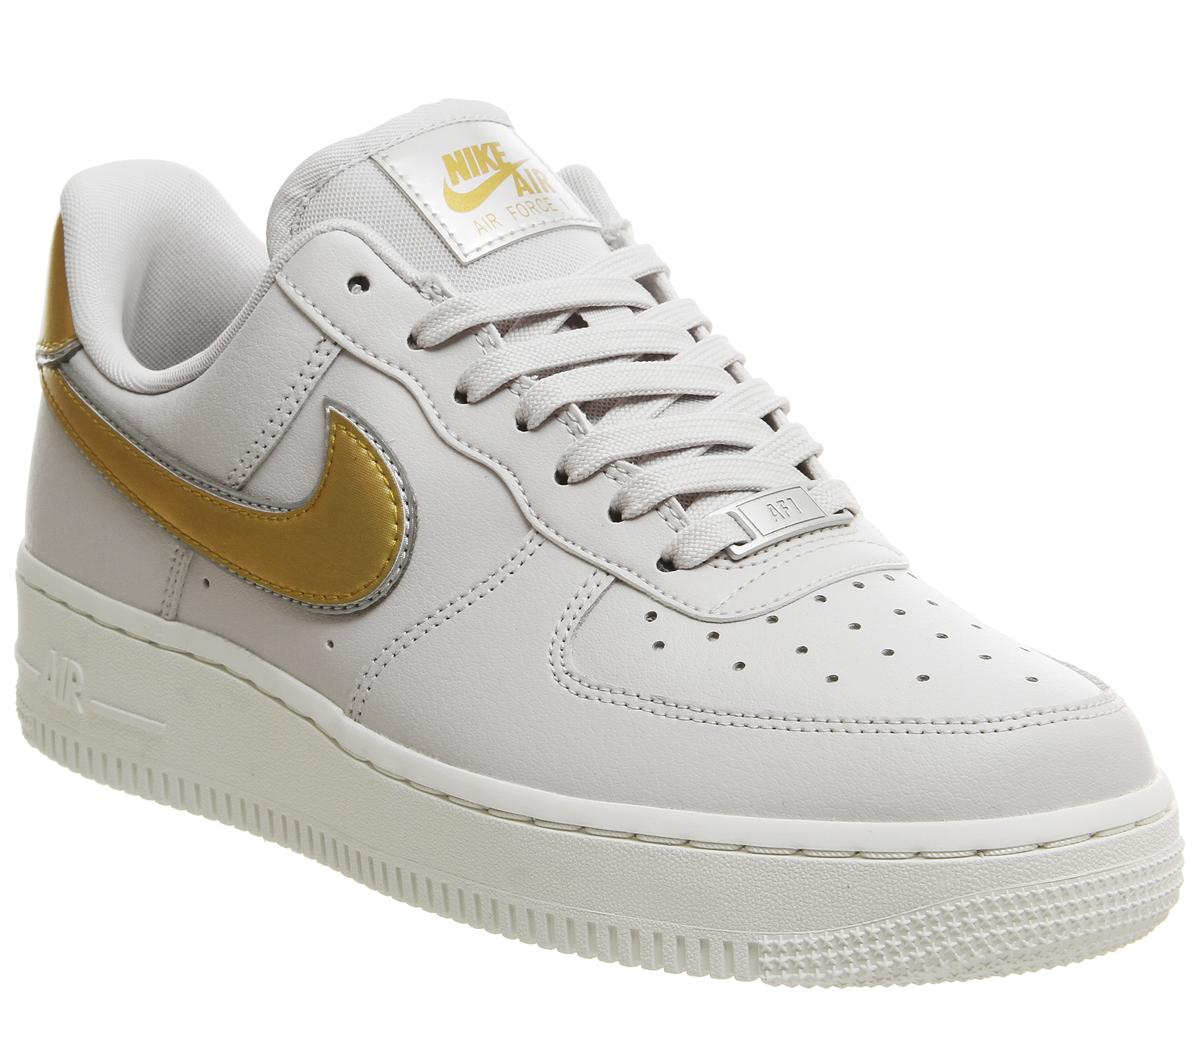 nike air force 1 grey and gold